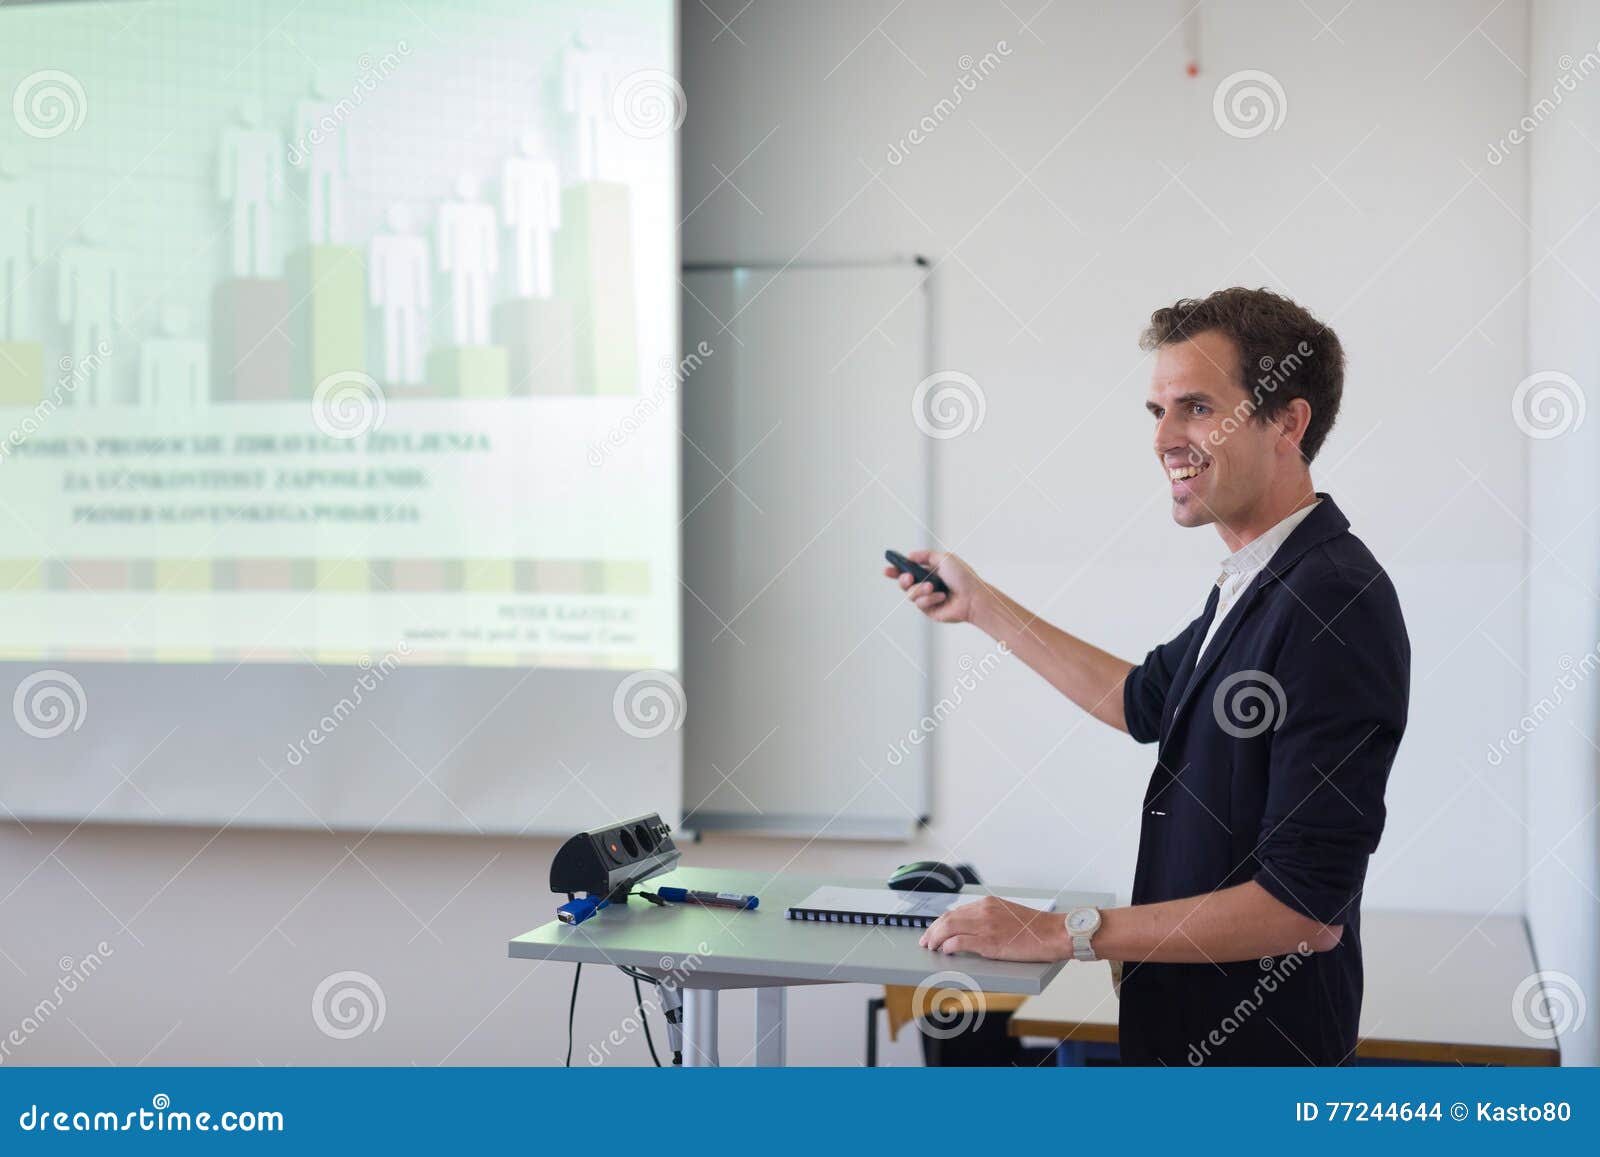 Thesis Defense Photos - Free & Royalty-Free Stock Photos from Dreamstime